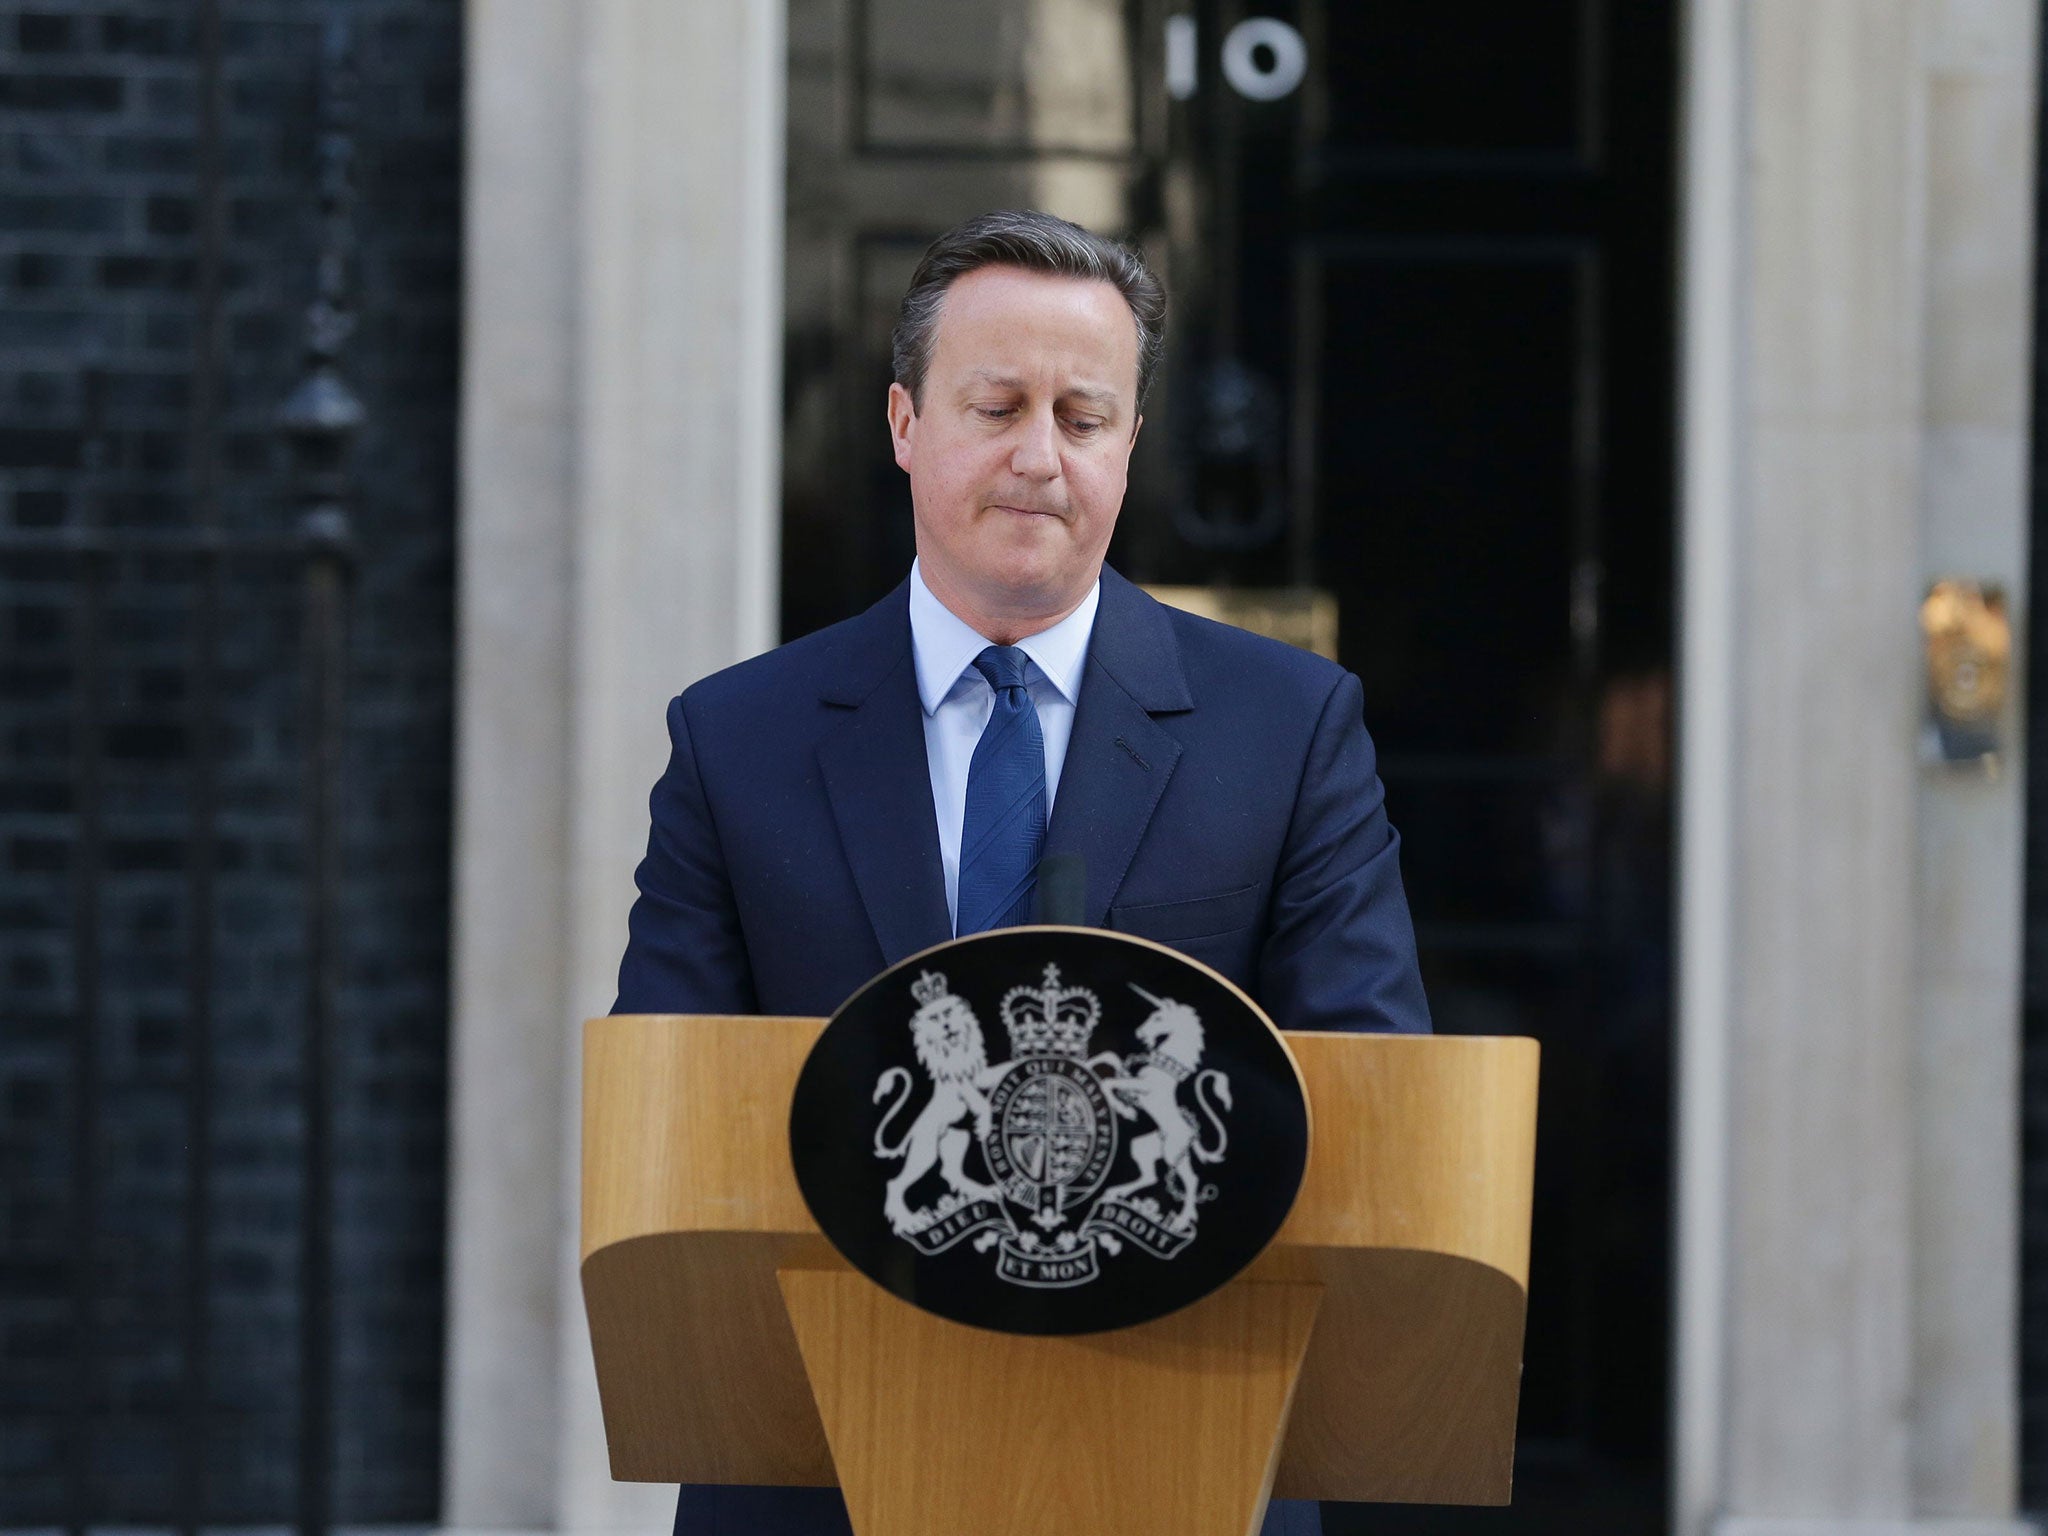 Prime Minister David Cameron resigns outside 10 Downing Street, London